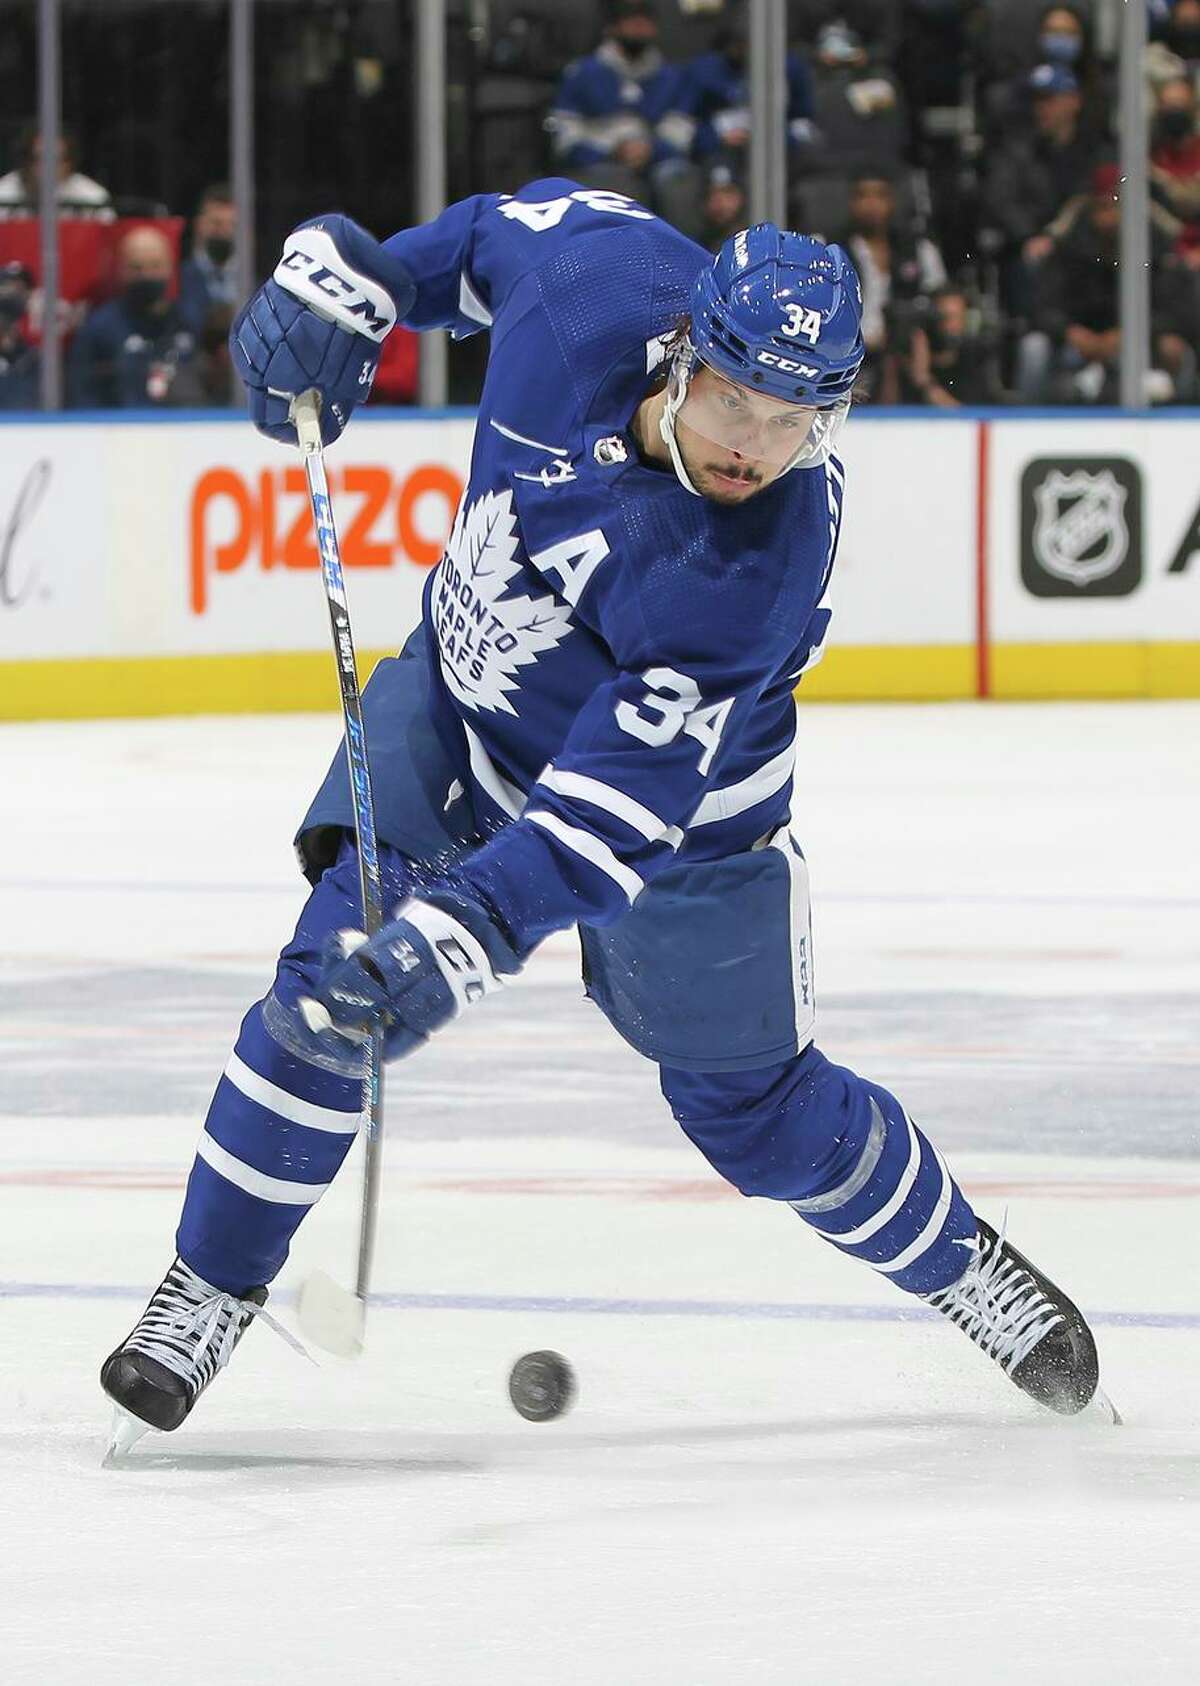 Auston Matthews of the Maple Leafs, blasting a shot against the visiting Wild, erased a tie with a goal to lead a 3-1 win.